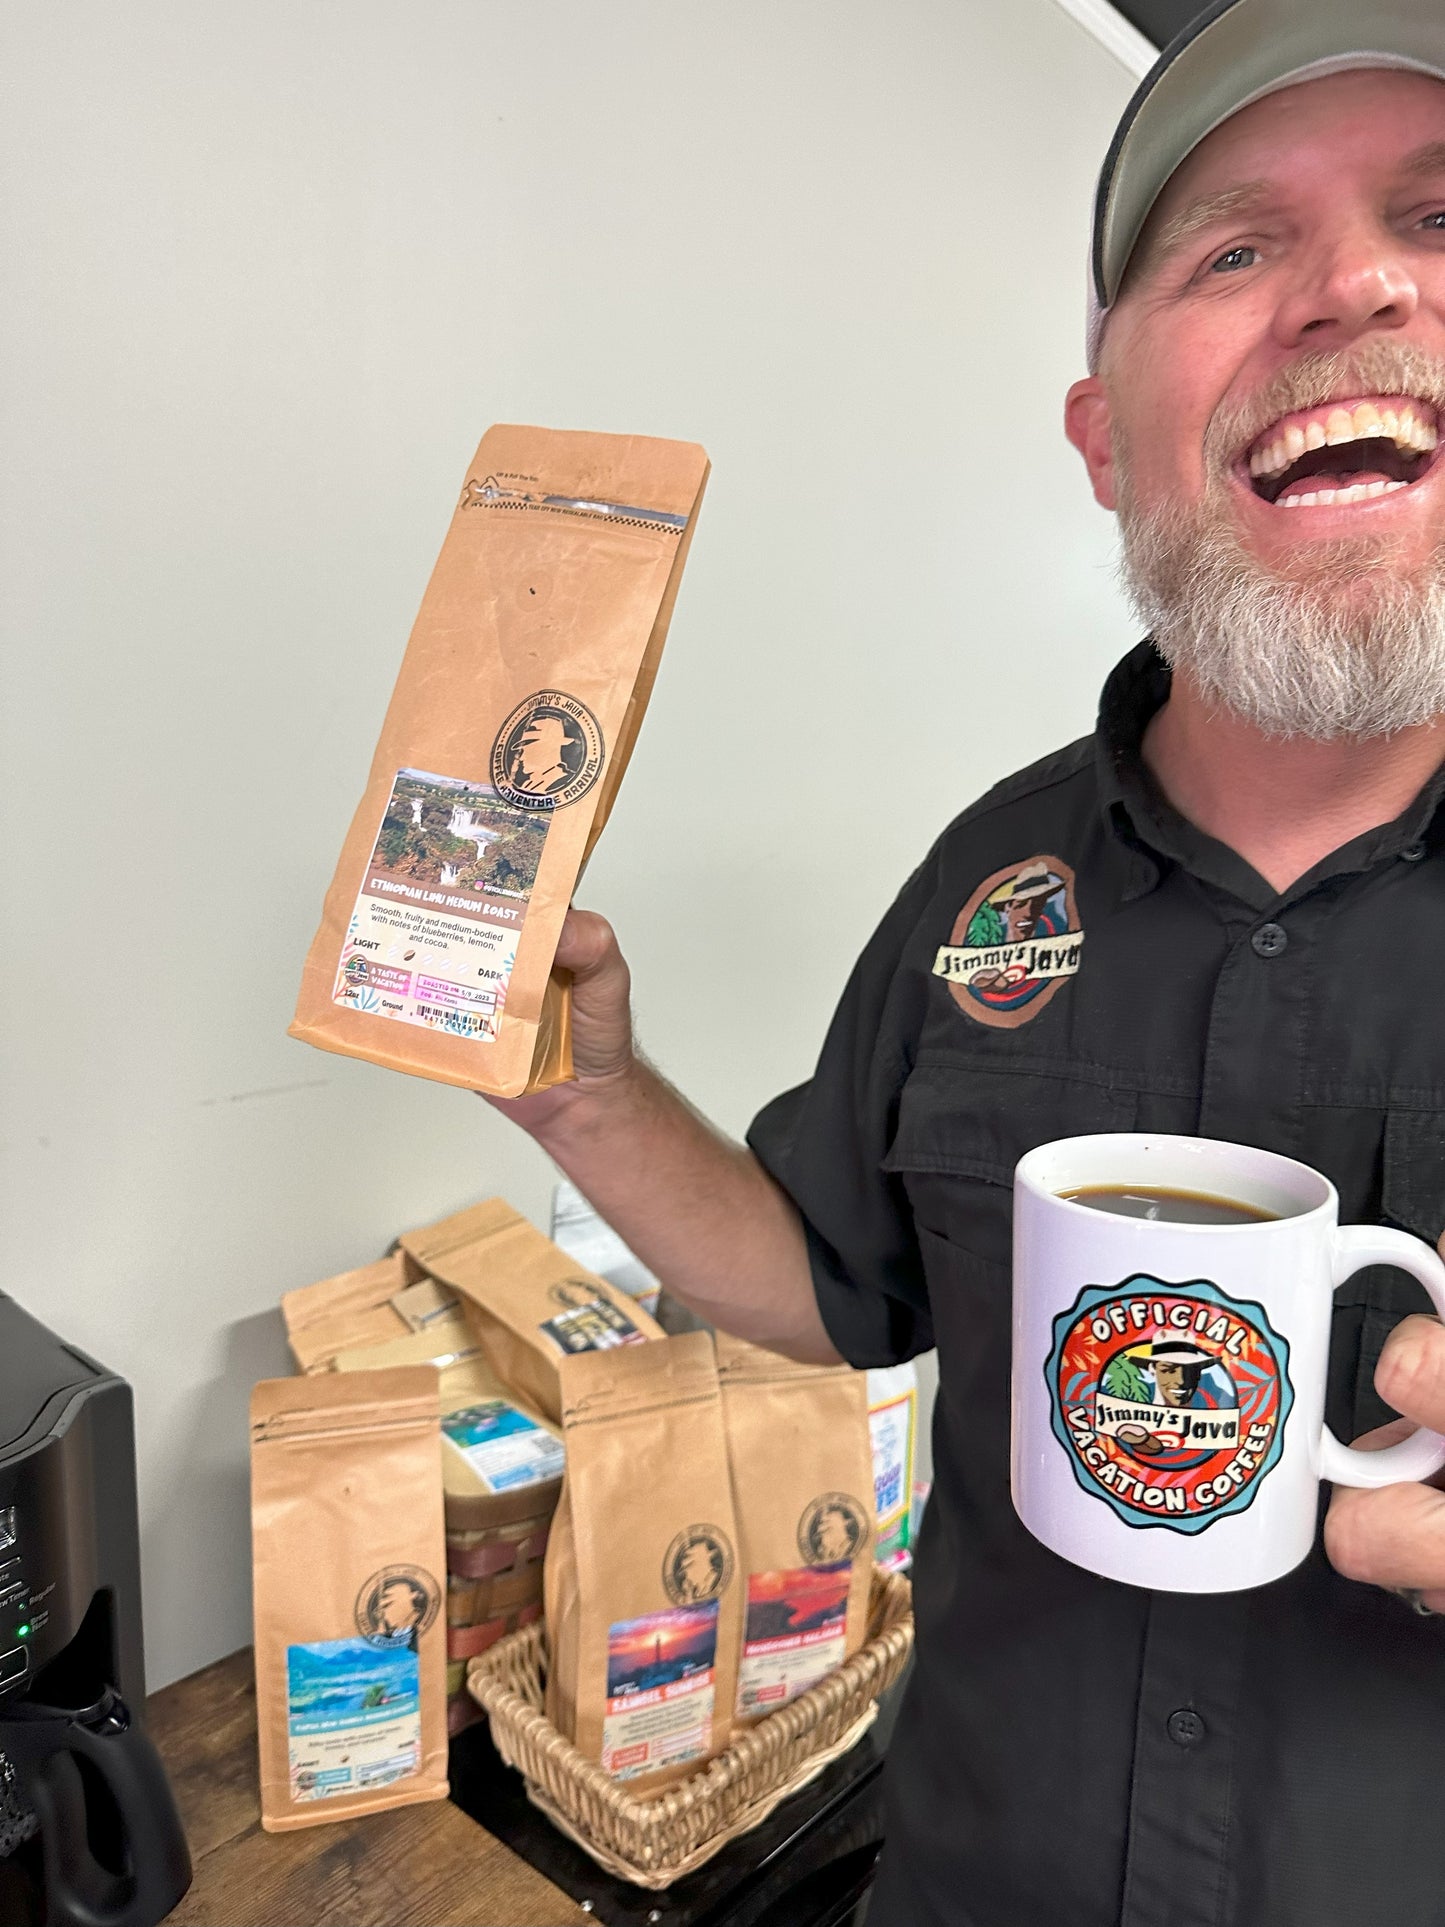 ric holding a bag of ethiopian coffee from jimmys java